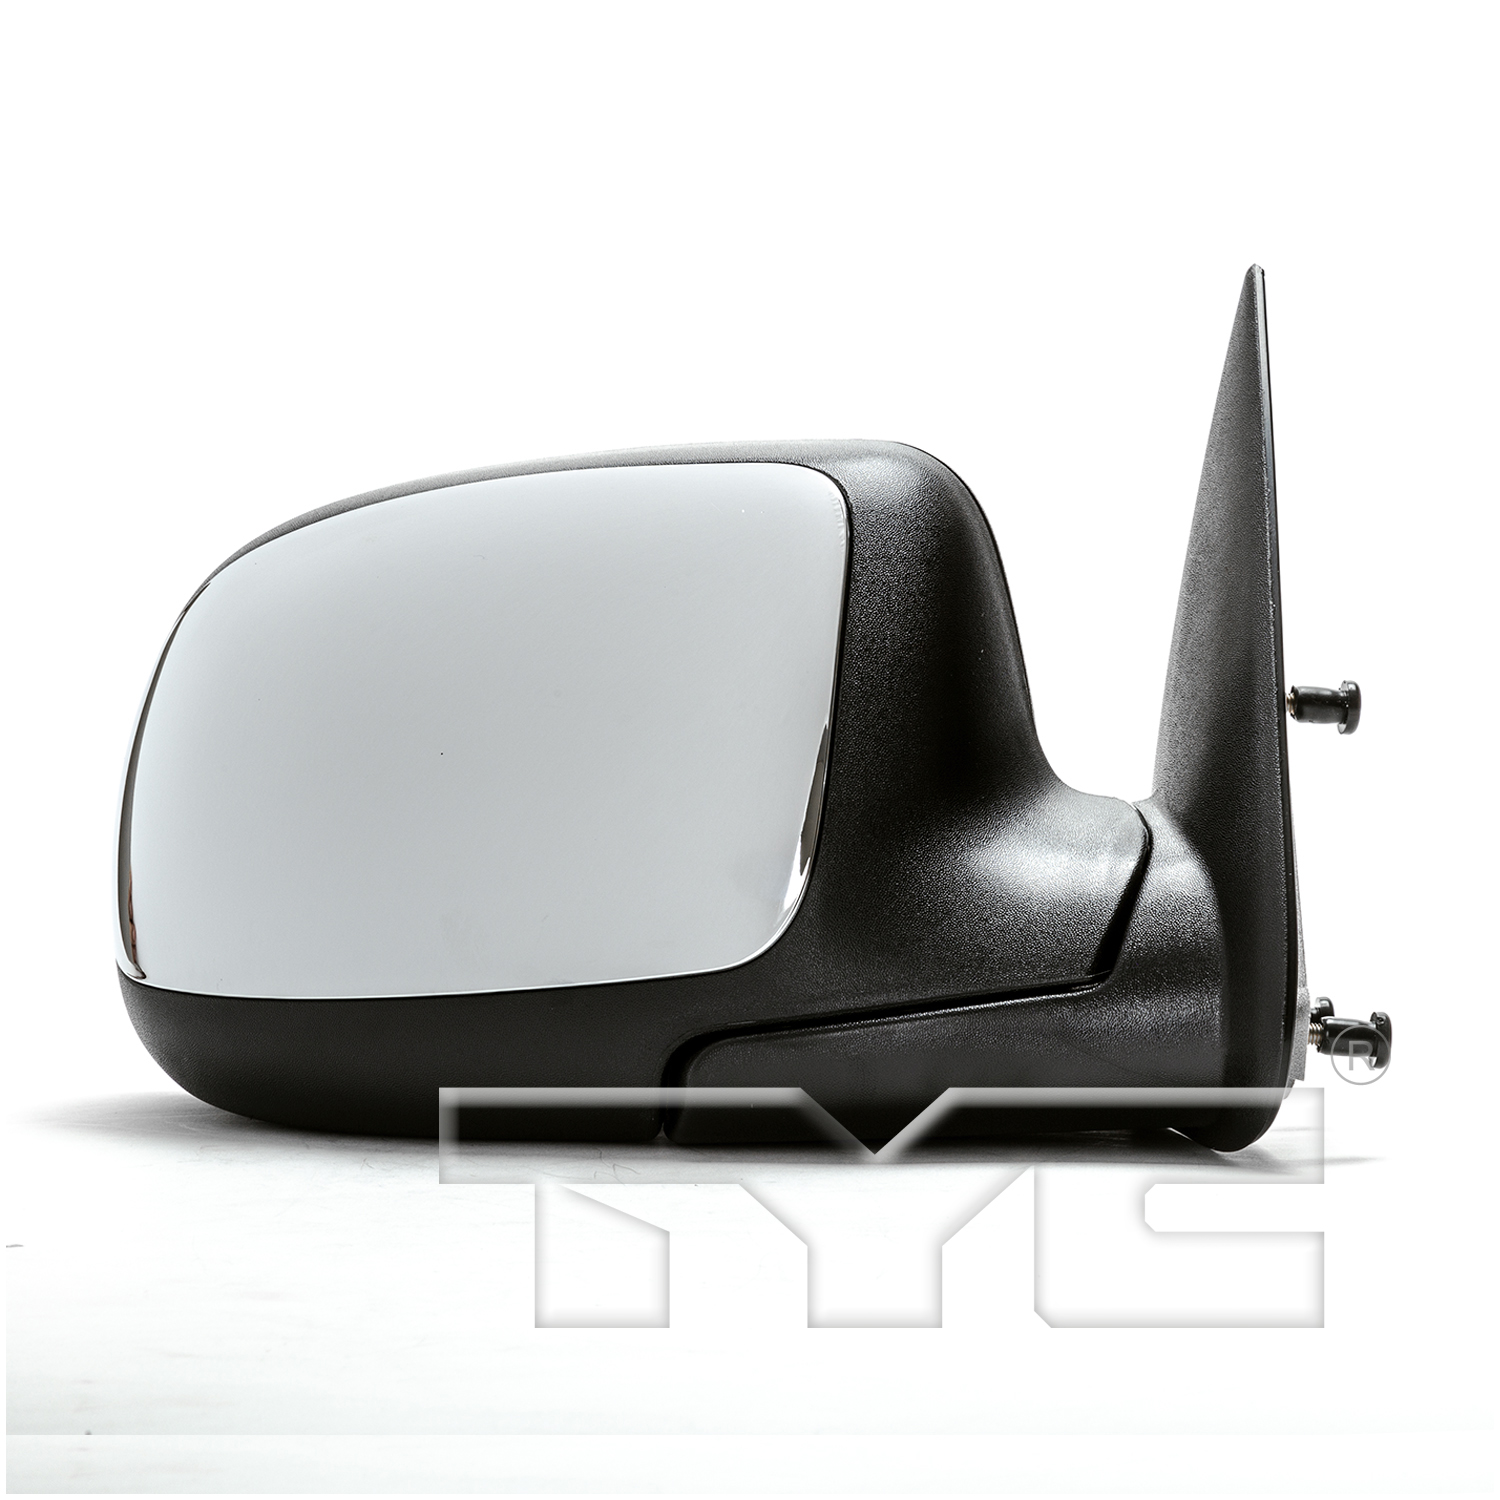 Aftermarket MIRRORS for CHEVROLET - SUBURBAN 1500, SUBURBAN 1500,00-05,RT Mirror outside rear view